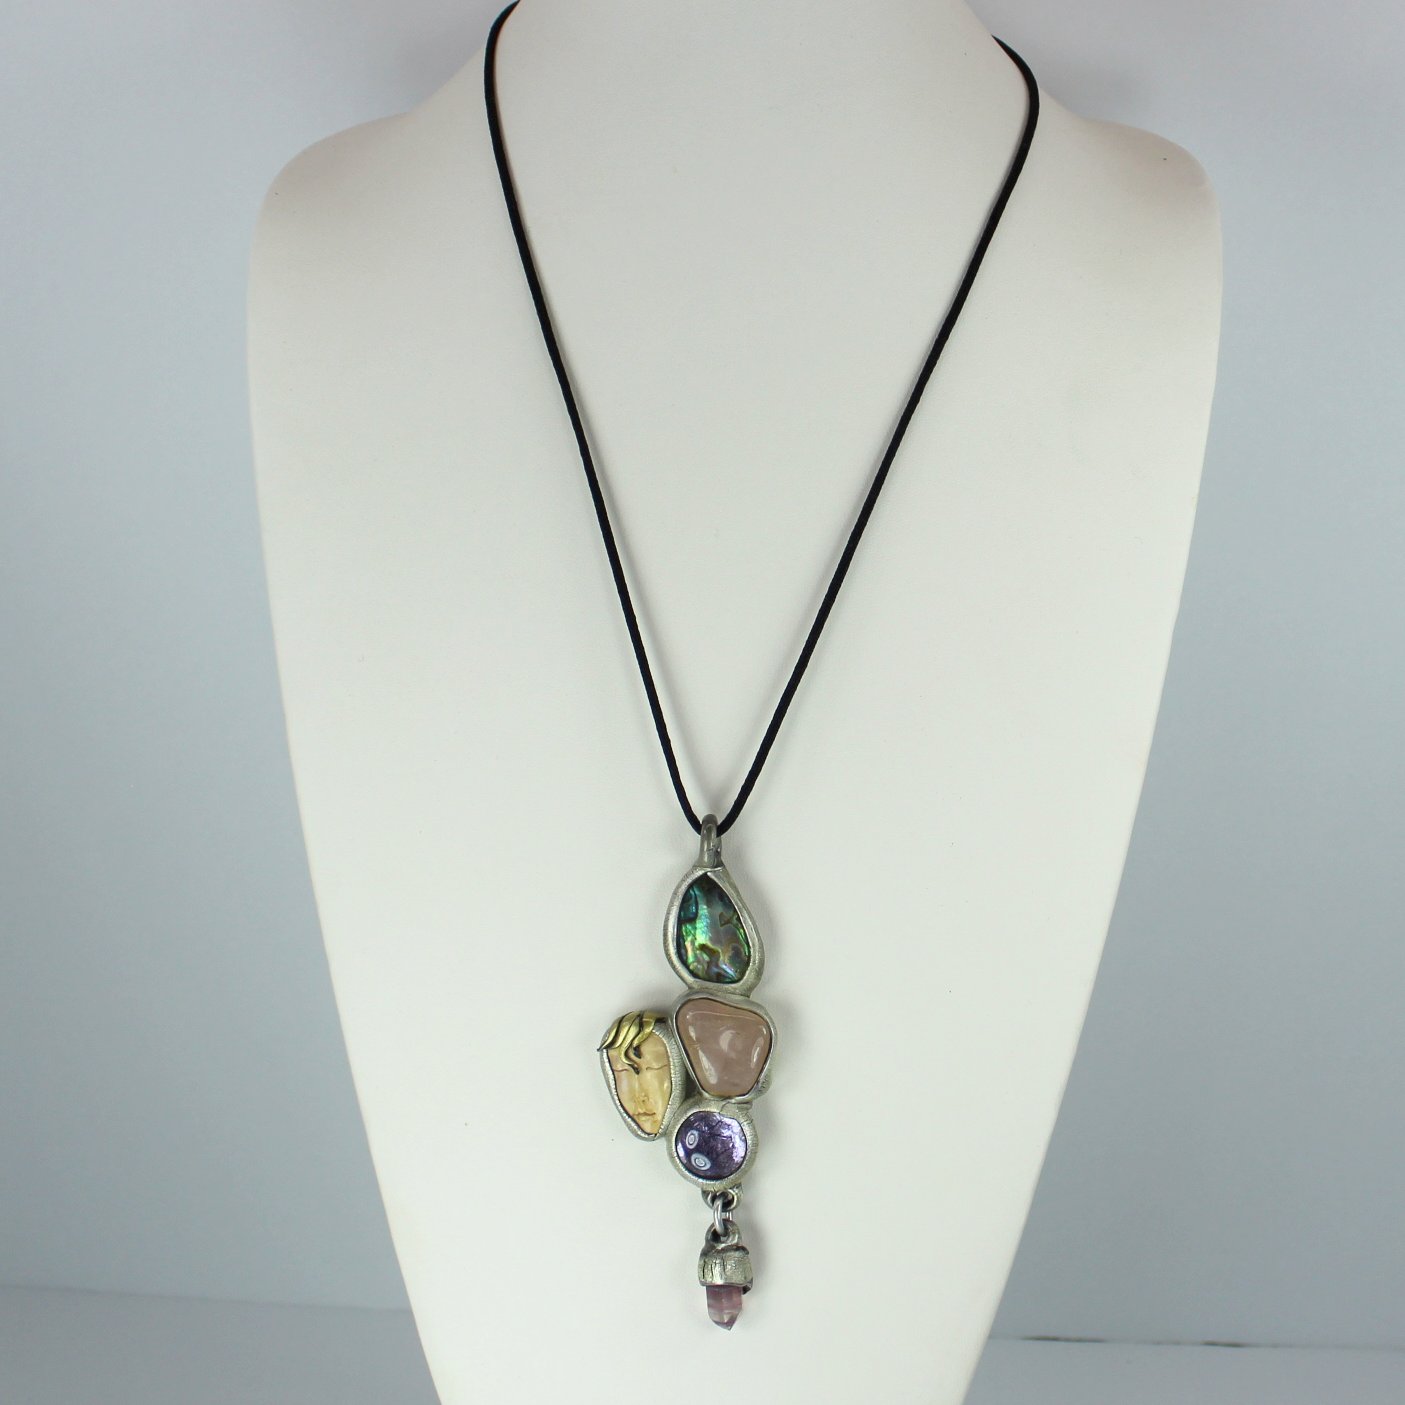 Susan Sorrentino Necklace Vintage Early Work Face Stones full view